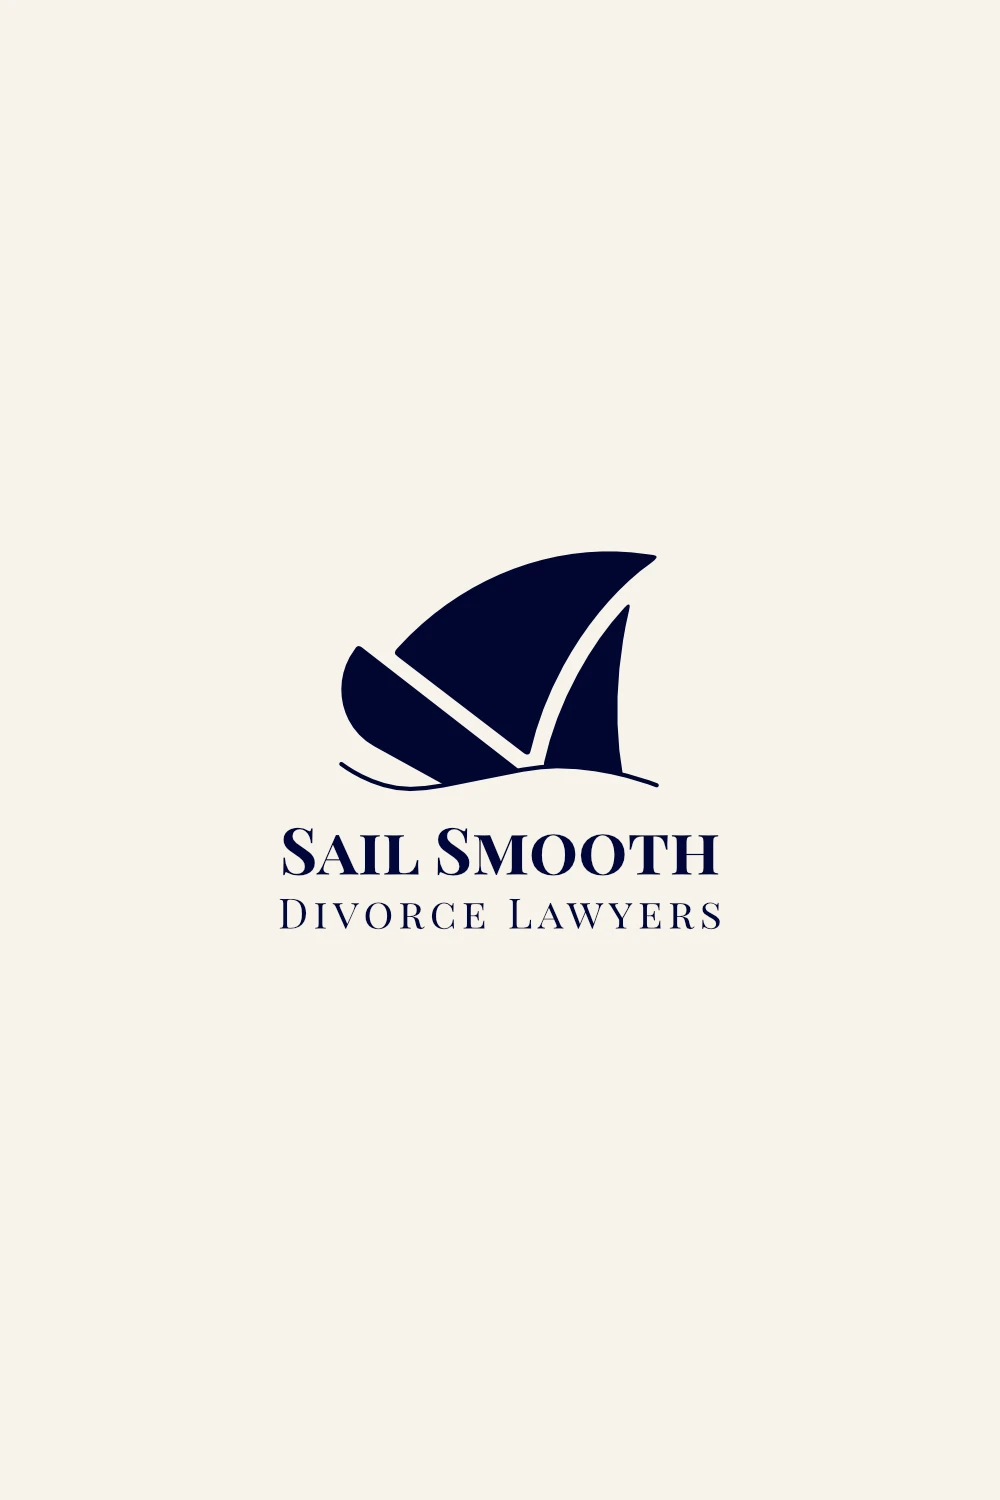 Create a Memorable and Recognizable Logo Design Sail Smooth Divorce Lawyers showing a sinking sailboat